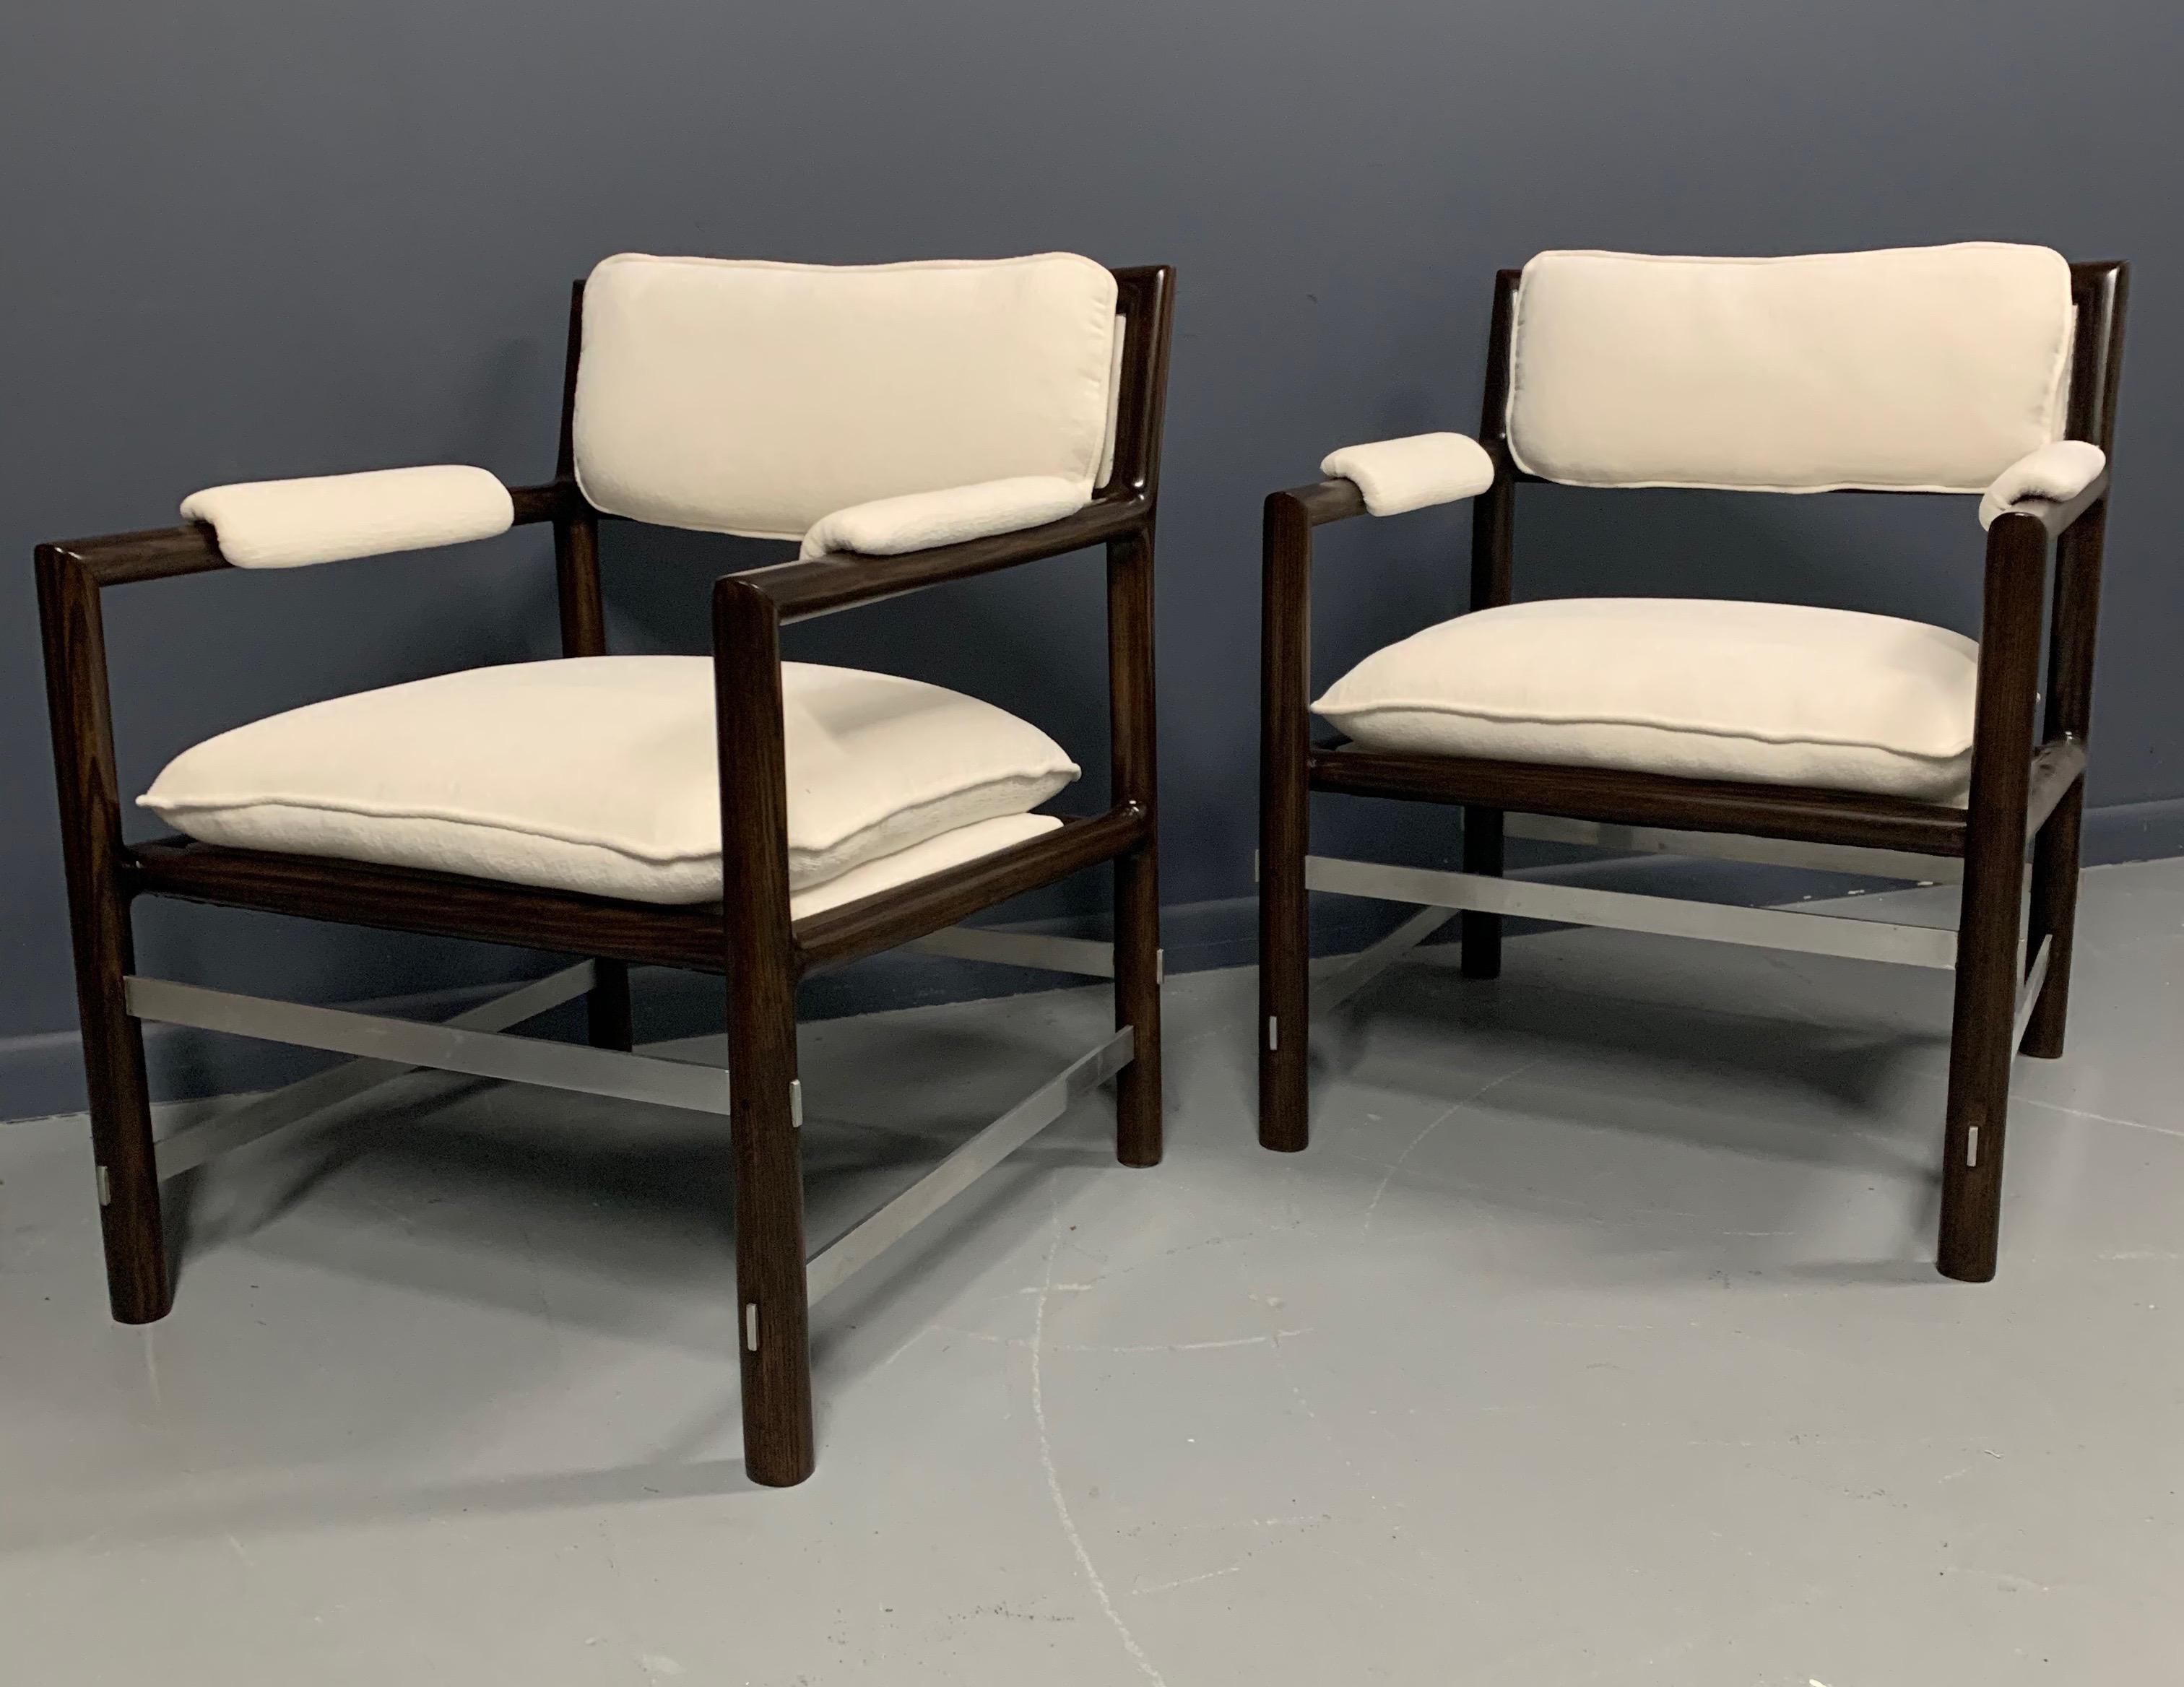 North American Edward Wormley Pair of Outstanding Armchairs for Dunbar in Velvet Midcentury For Sale